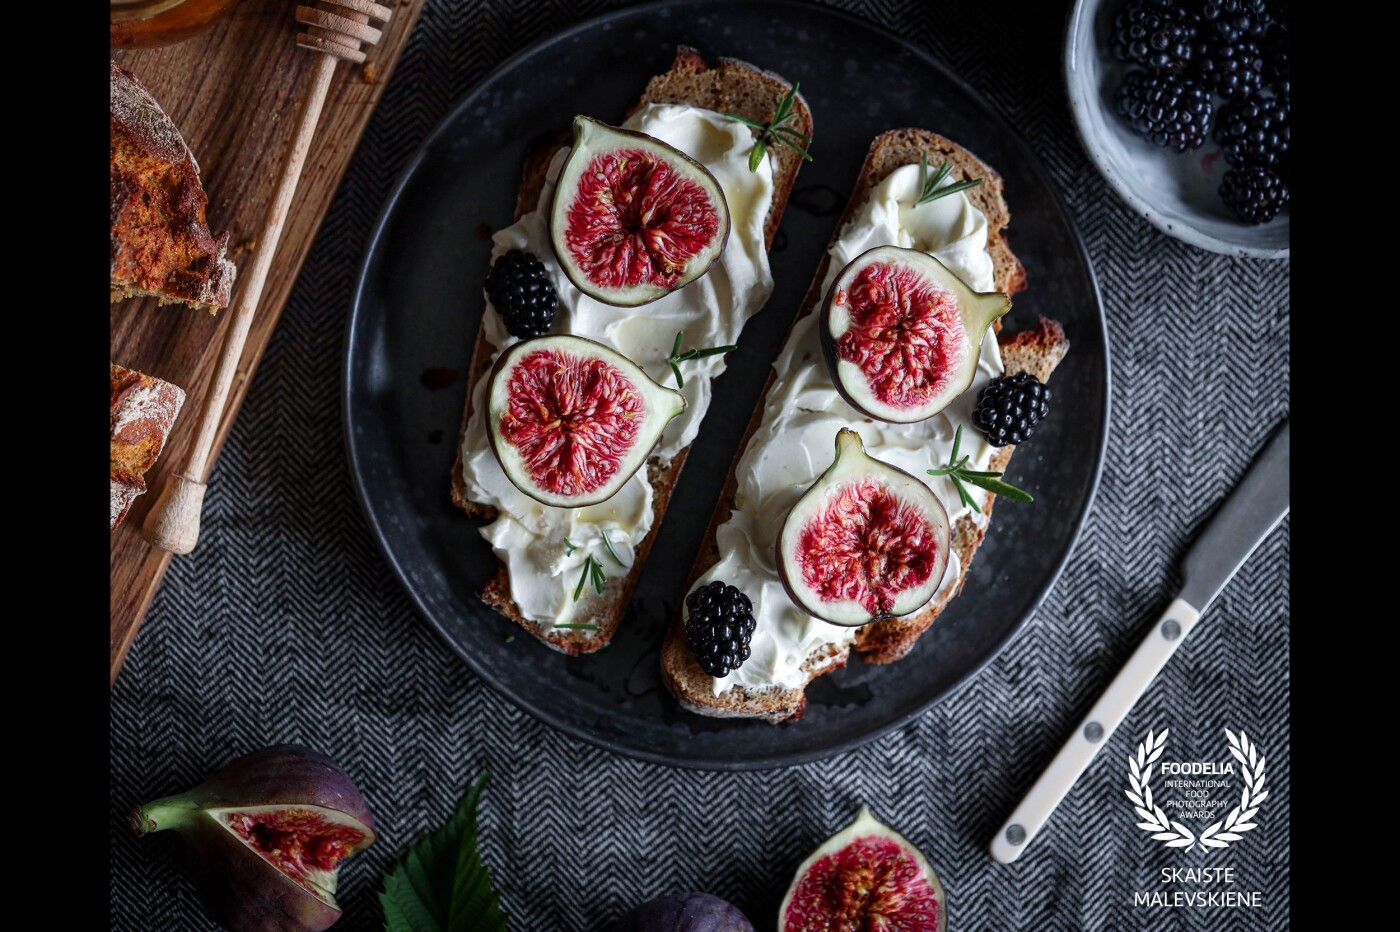 One of the simplest ways to enjoy the best tastes and textures of figs is to eat them fresh on a sourdough bread toast, with a bit of a cream cheese or creamy goat cheese (of you like it) a drizzle of honey and a few rosemary leaves.